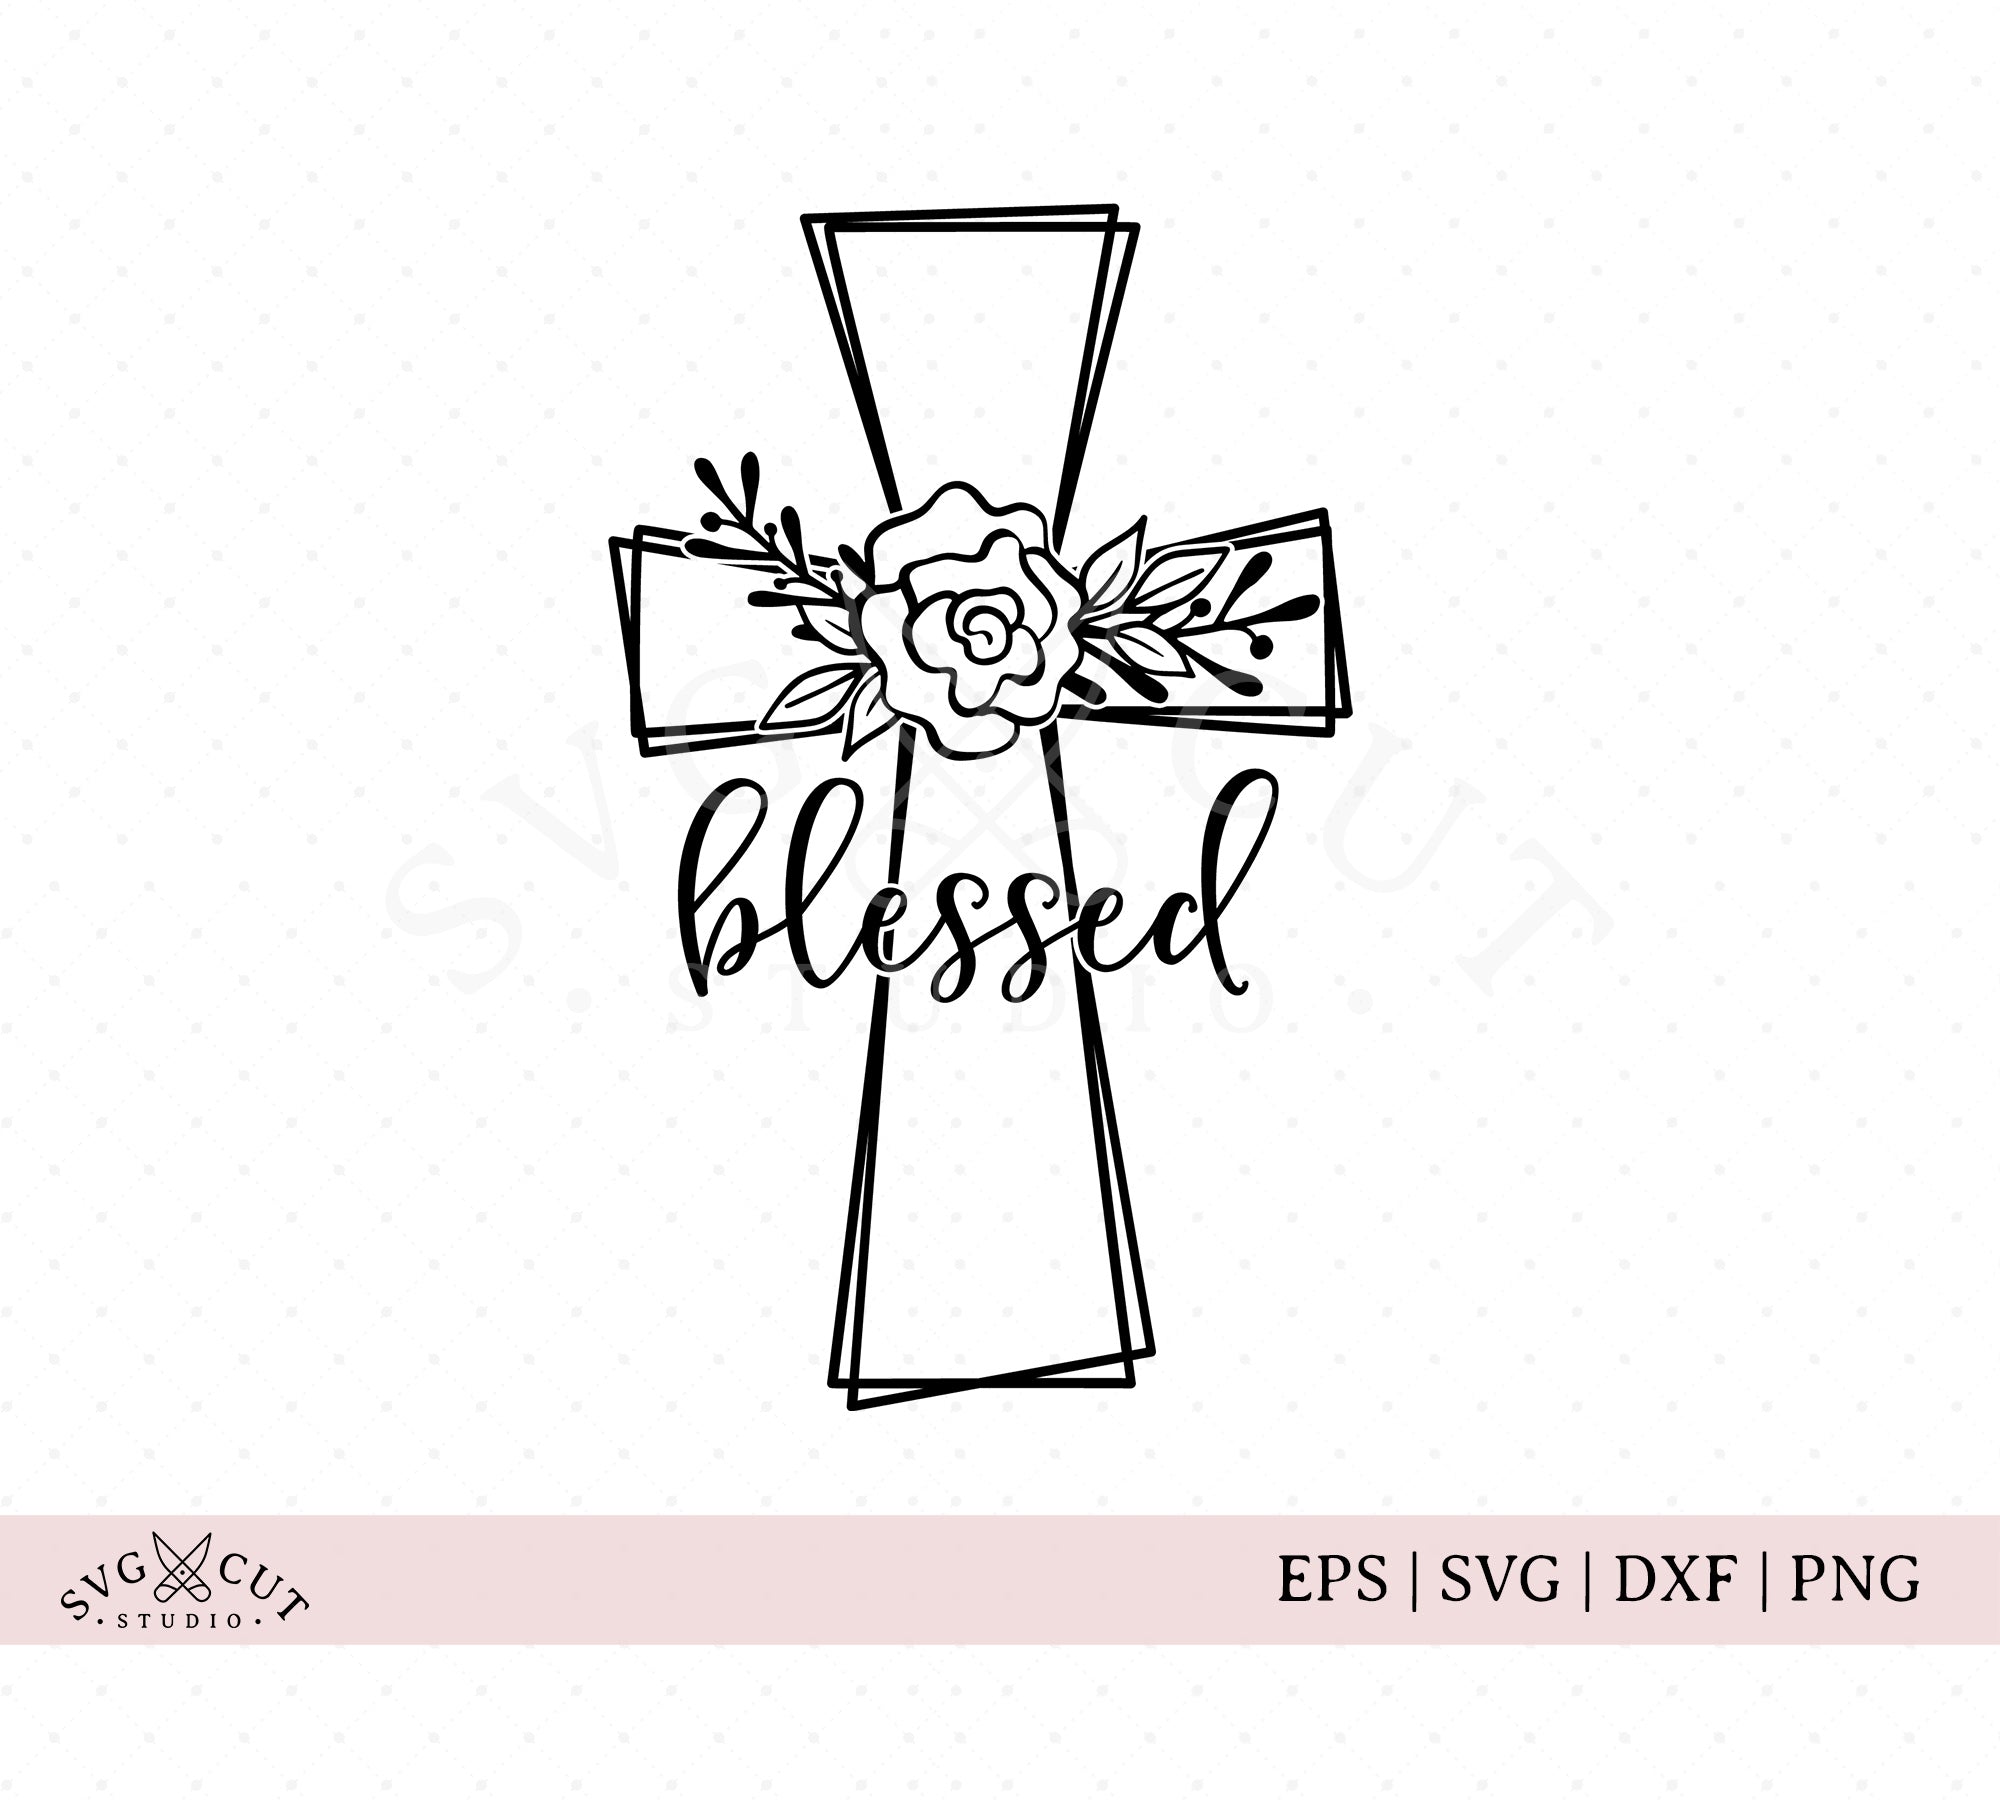 Roses SVG , Clipart PNG - Flower SVG Cut Files for Cricut and silhouette